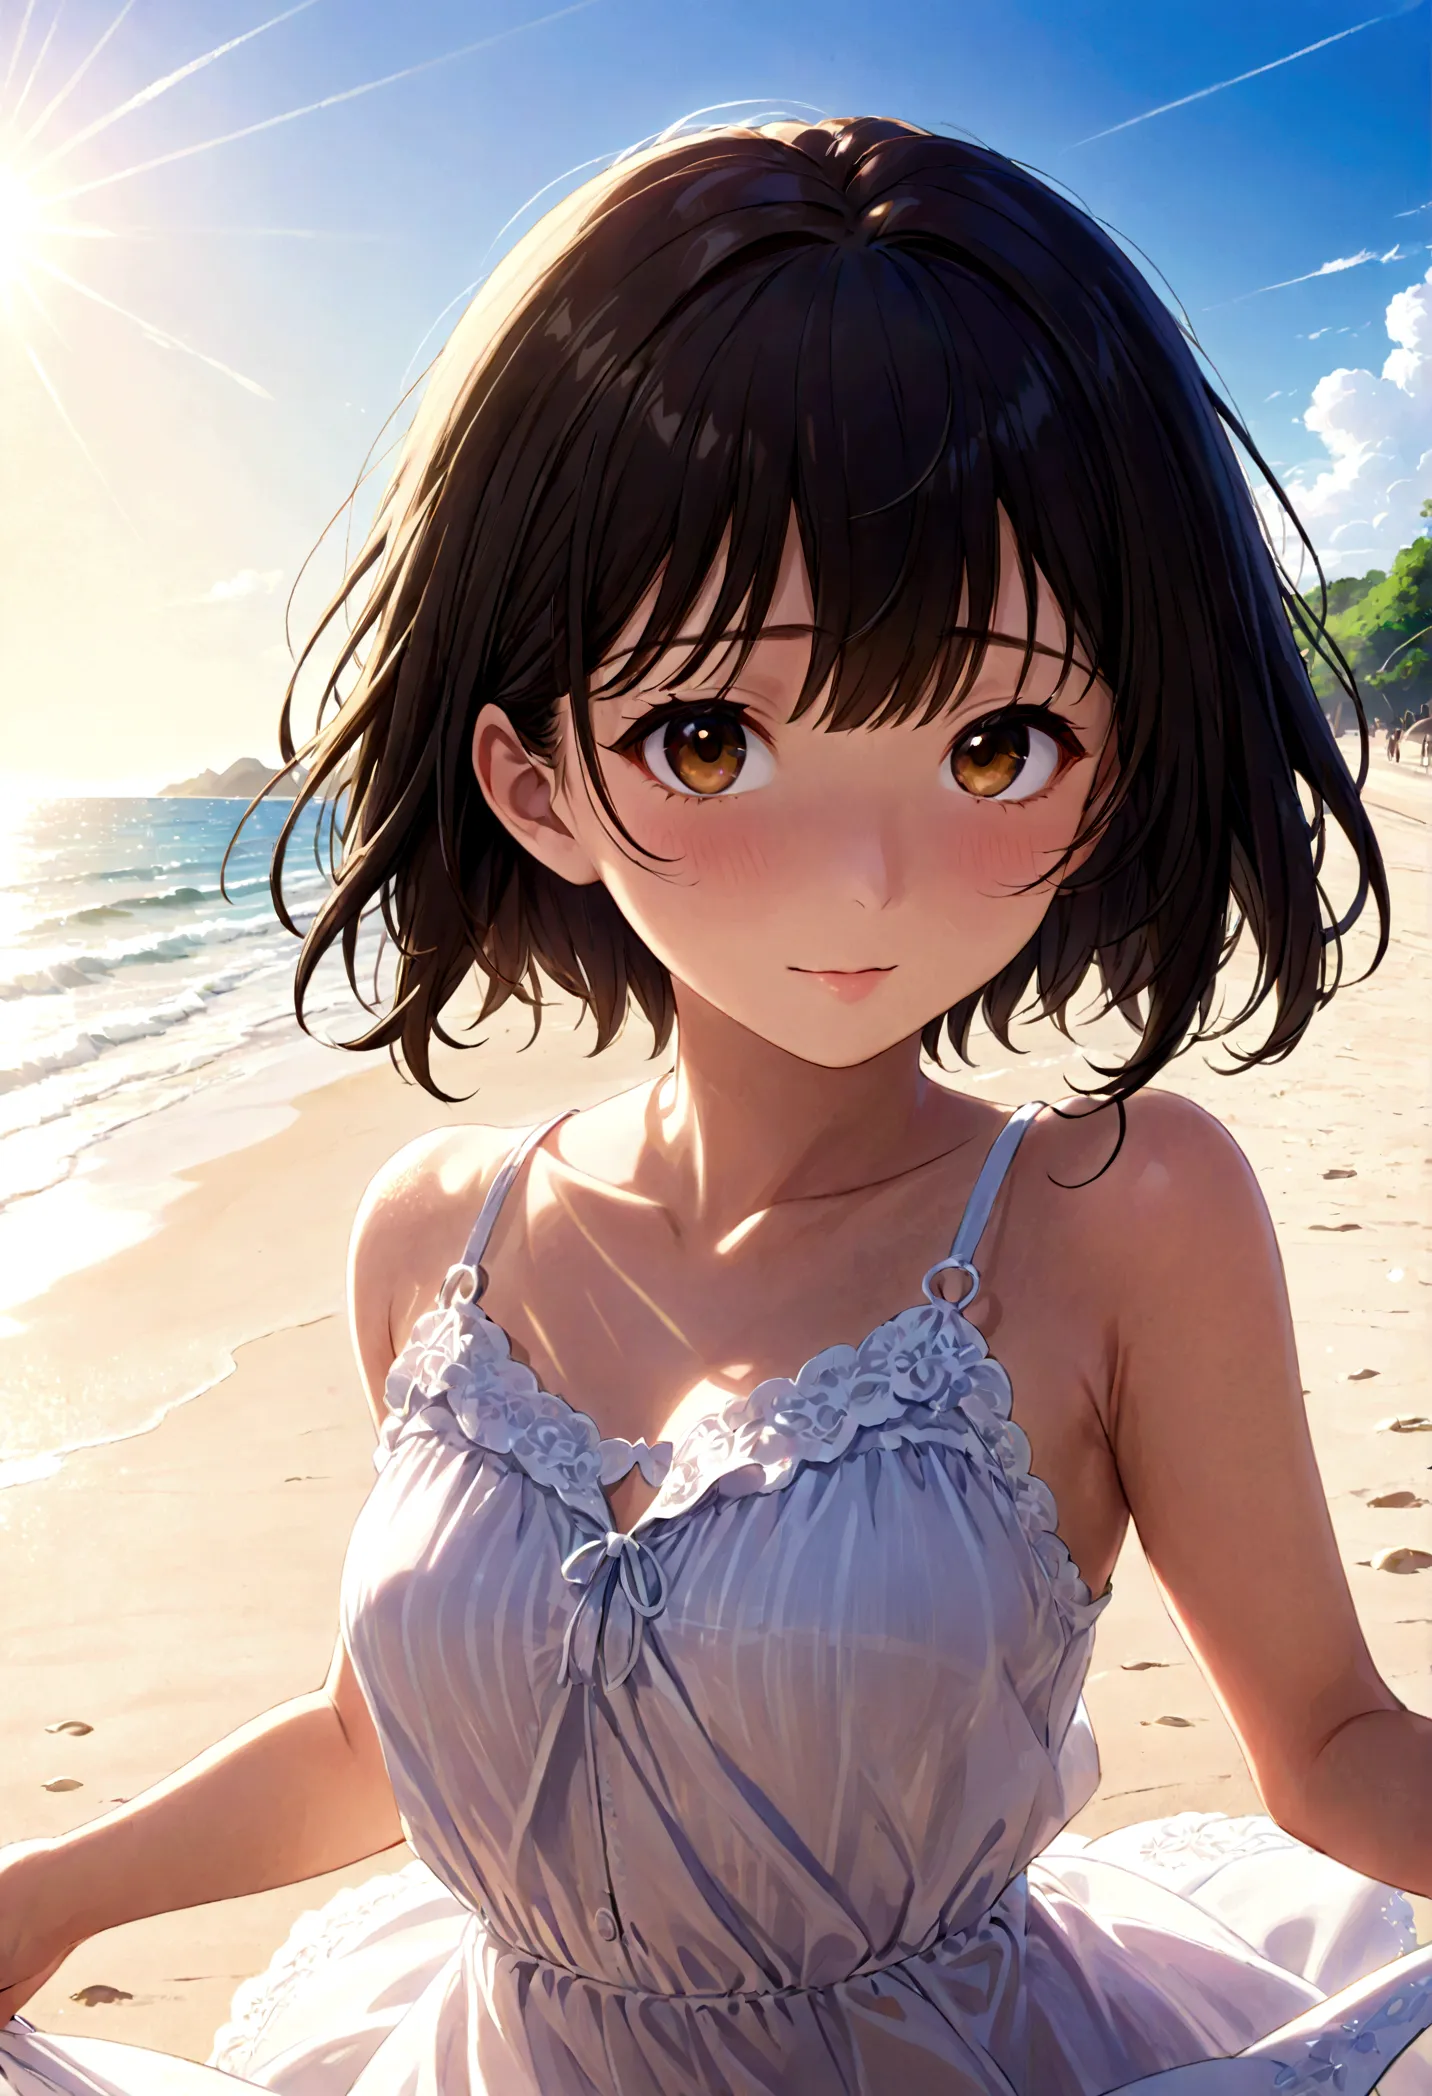 (master quality)(Anime style)(RAW Photos)High detail, Super detailed, Ultra HD Beautiful girl with short black hair having fun o...